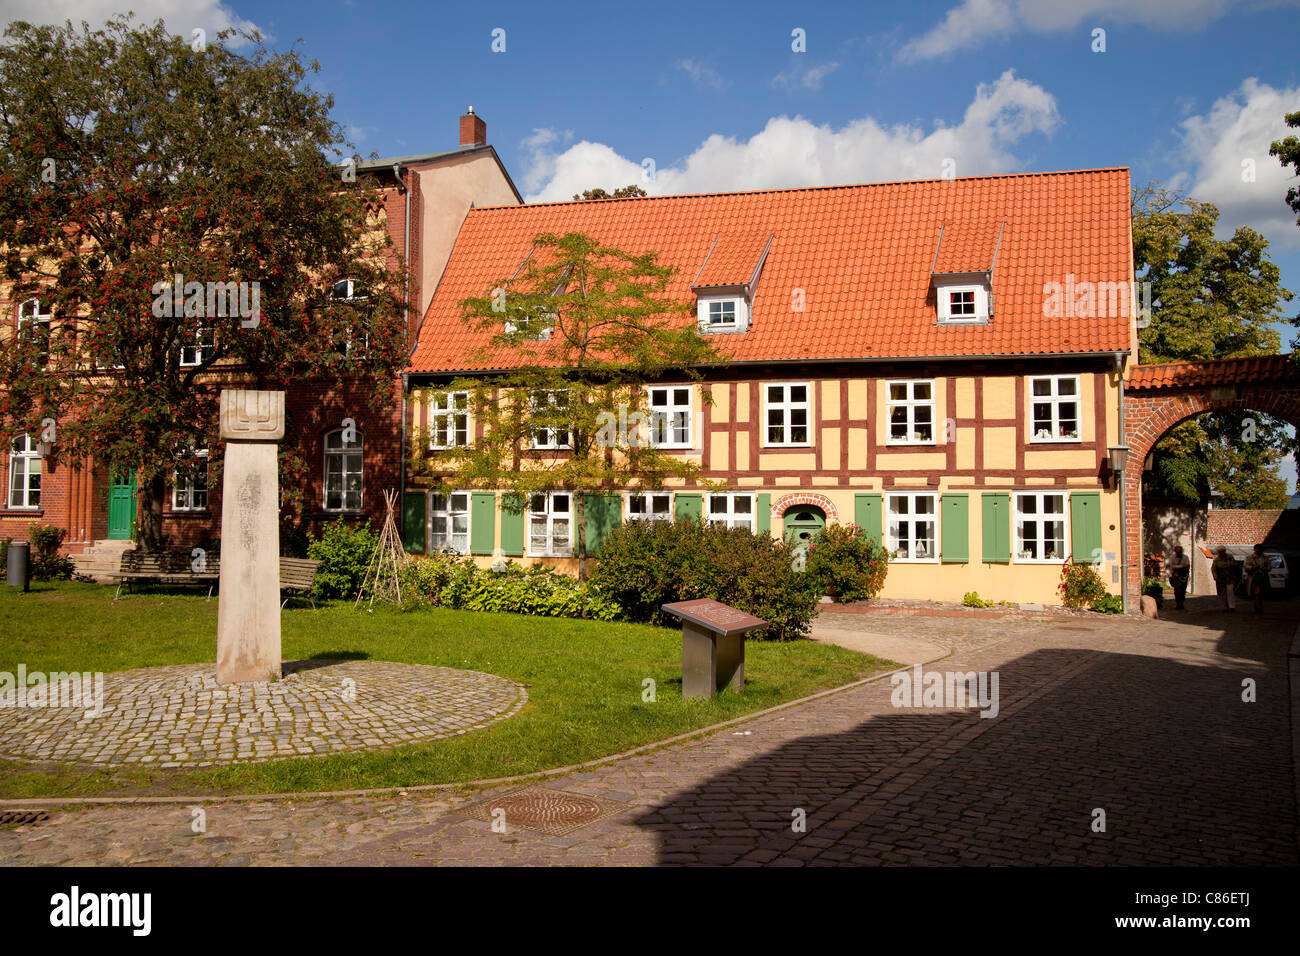 Monument stone for the cities jews at the Johanniskloster, a former Franciscan Monastery in the Hanseatic City of Stralsund, Ger Stock Photo